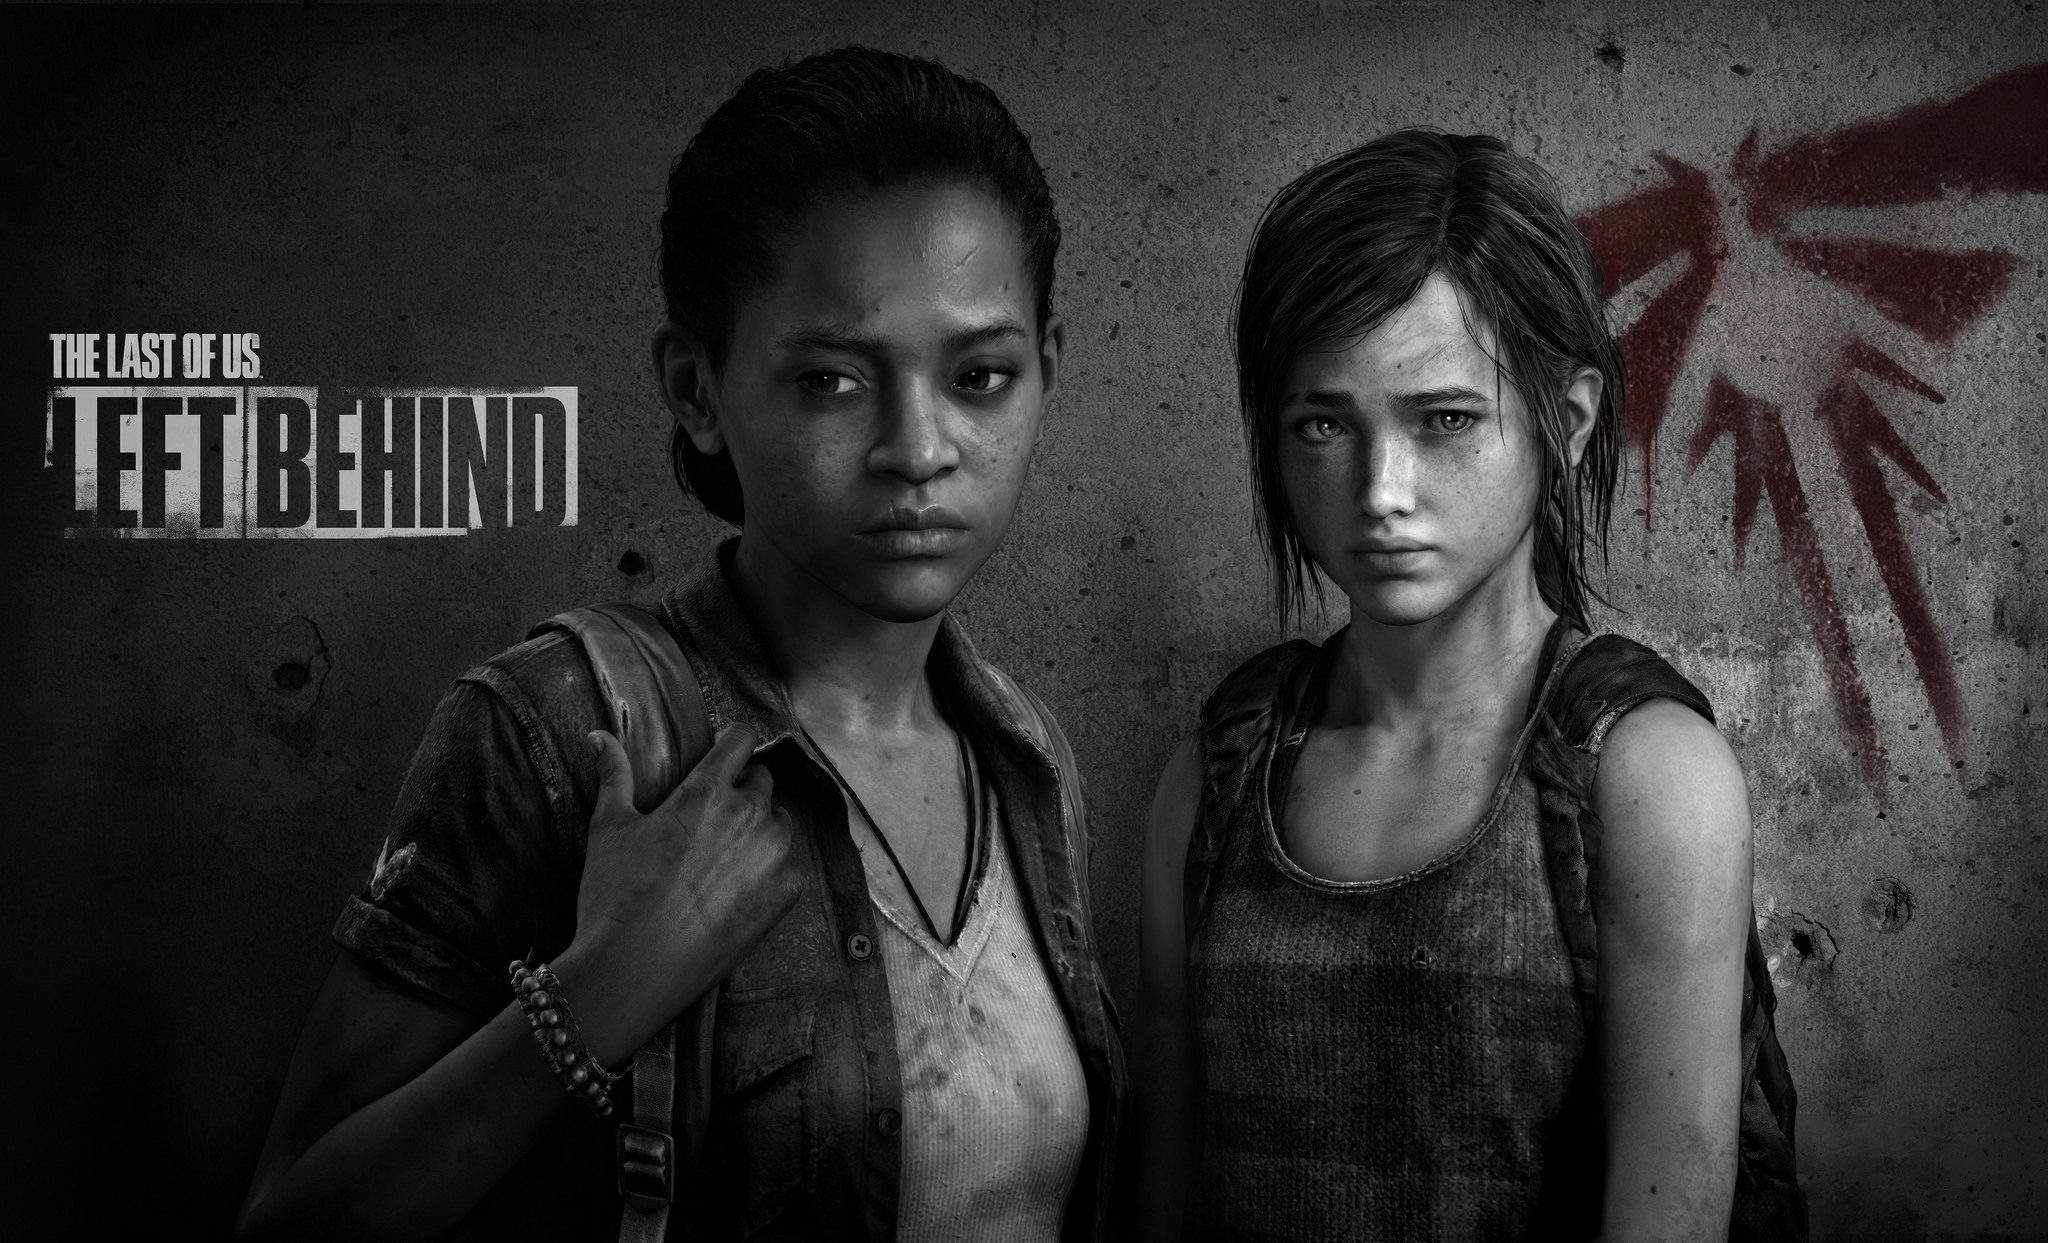 “Left Behind” DLC Being Released As Stand-Alone Game - Naughty Dog Lowering Price of Add-On DLC For TLOU, As Well